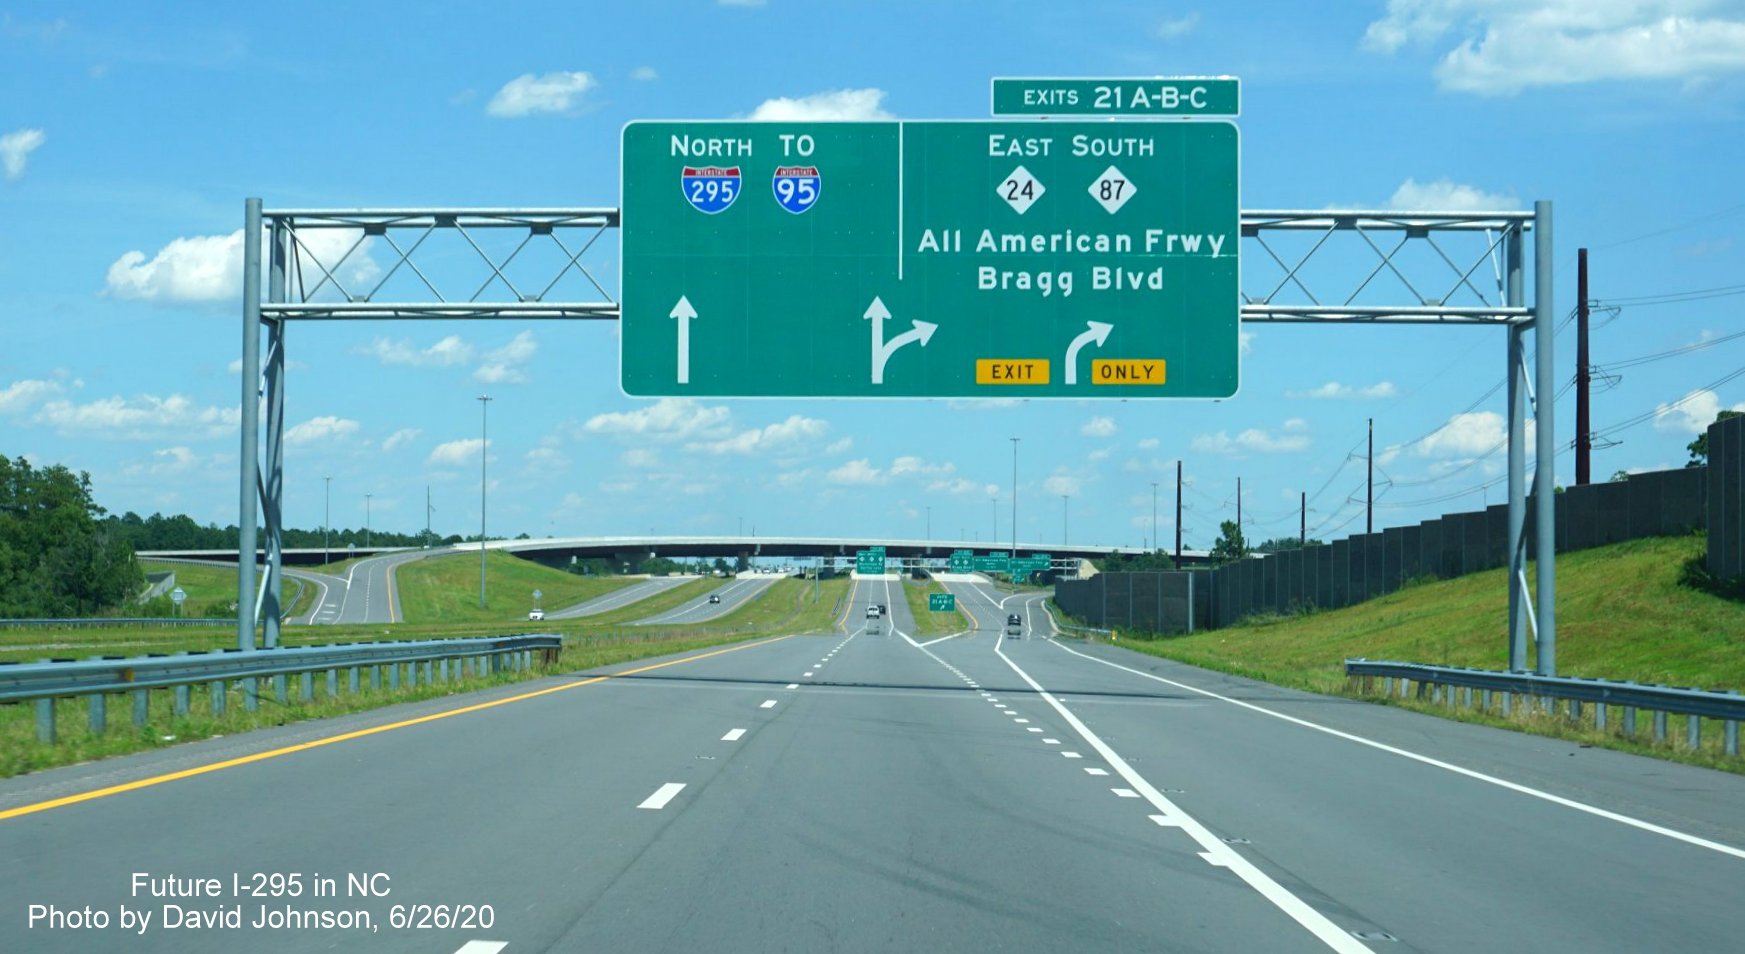 Image of overhead ramp sign for All American Freeway/Bragg Blvd exit with I-295 shield, by David Johnson June 2020